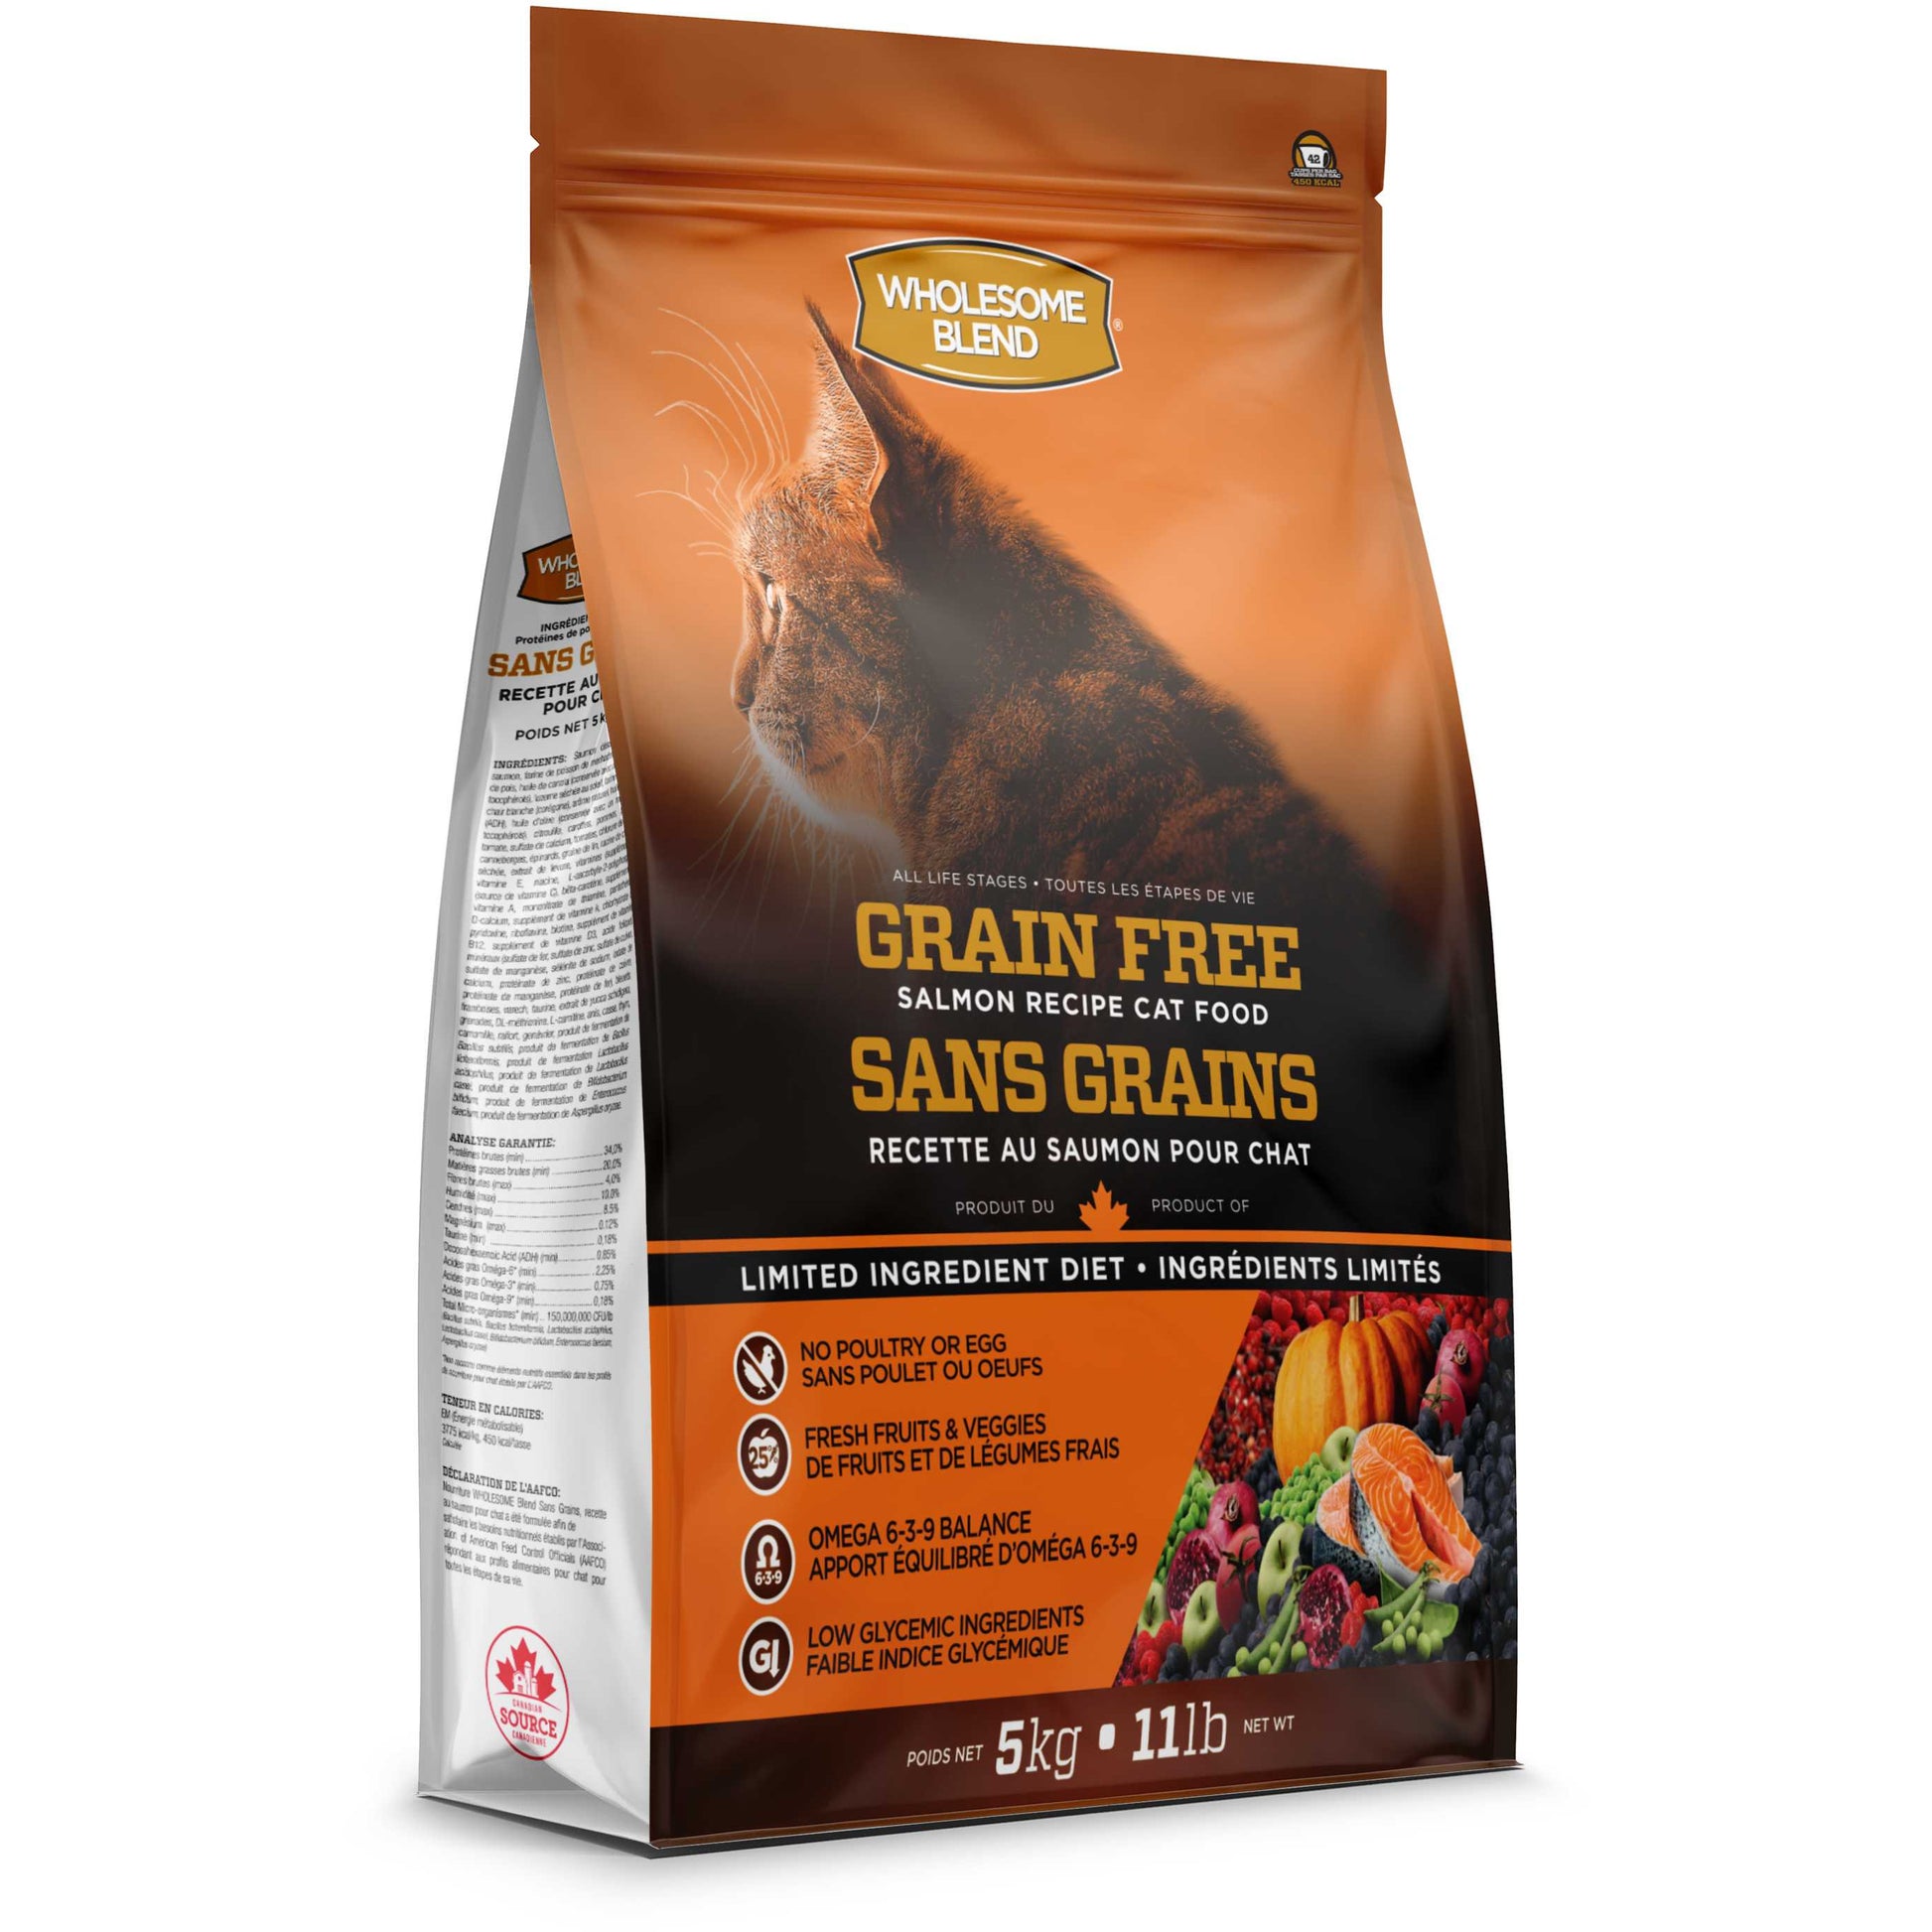 Wholesome Blend Grain-Free Salmon Dry Cat Food Wholesome Blend